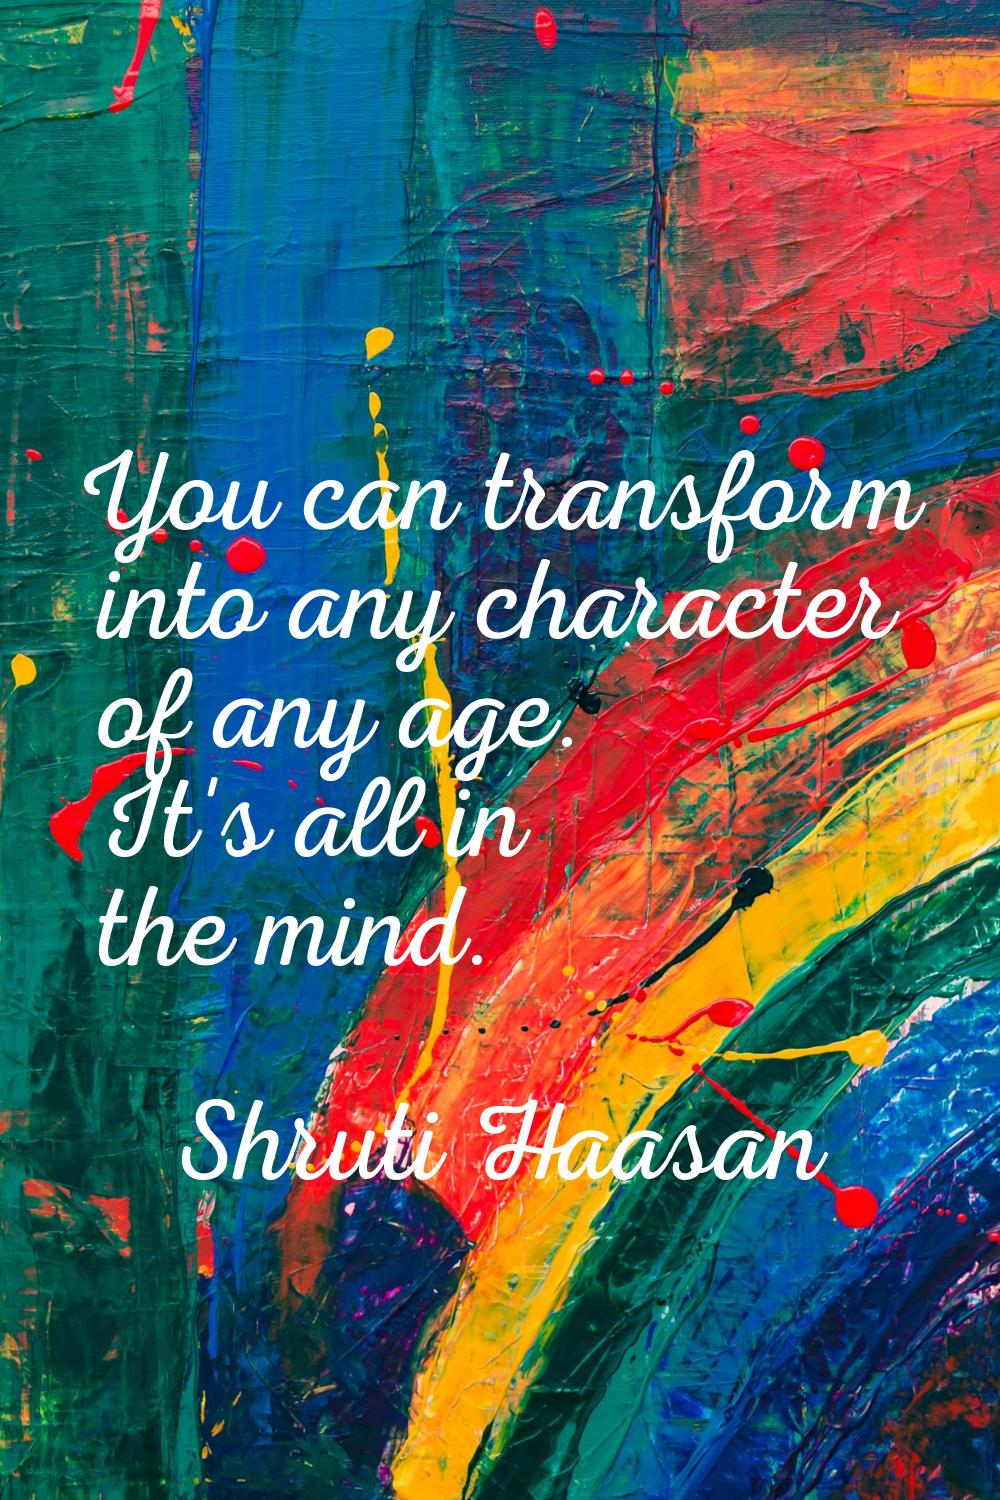 You can transform into any character of any age. It's all in the mind.